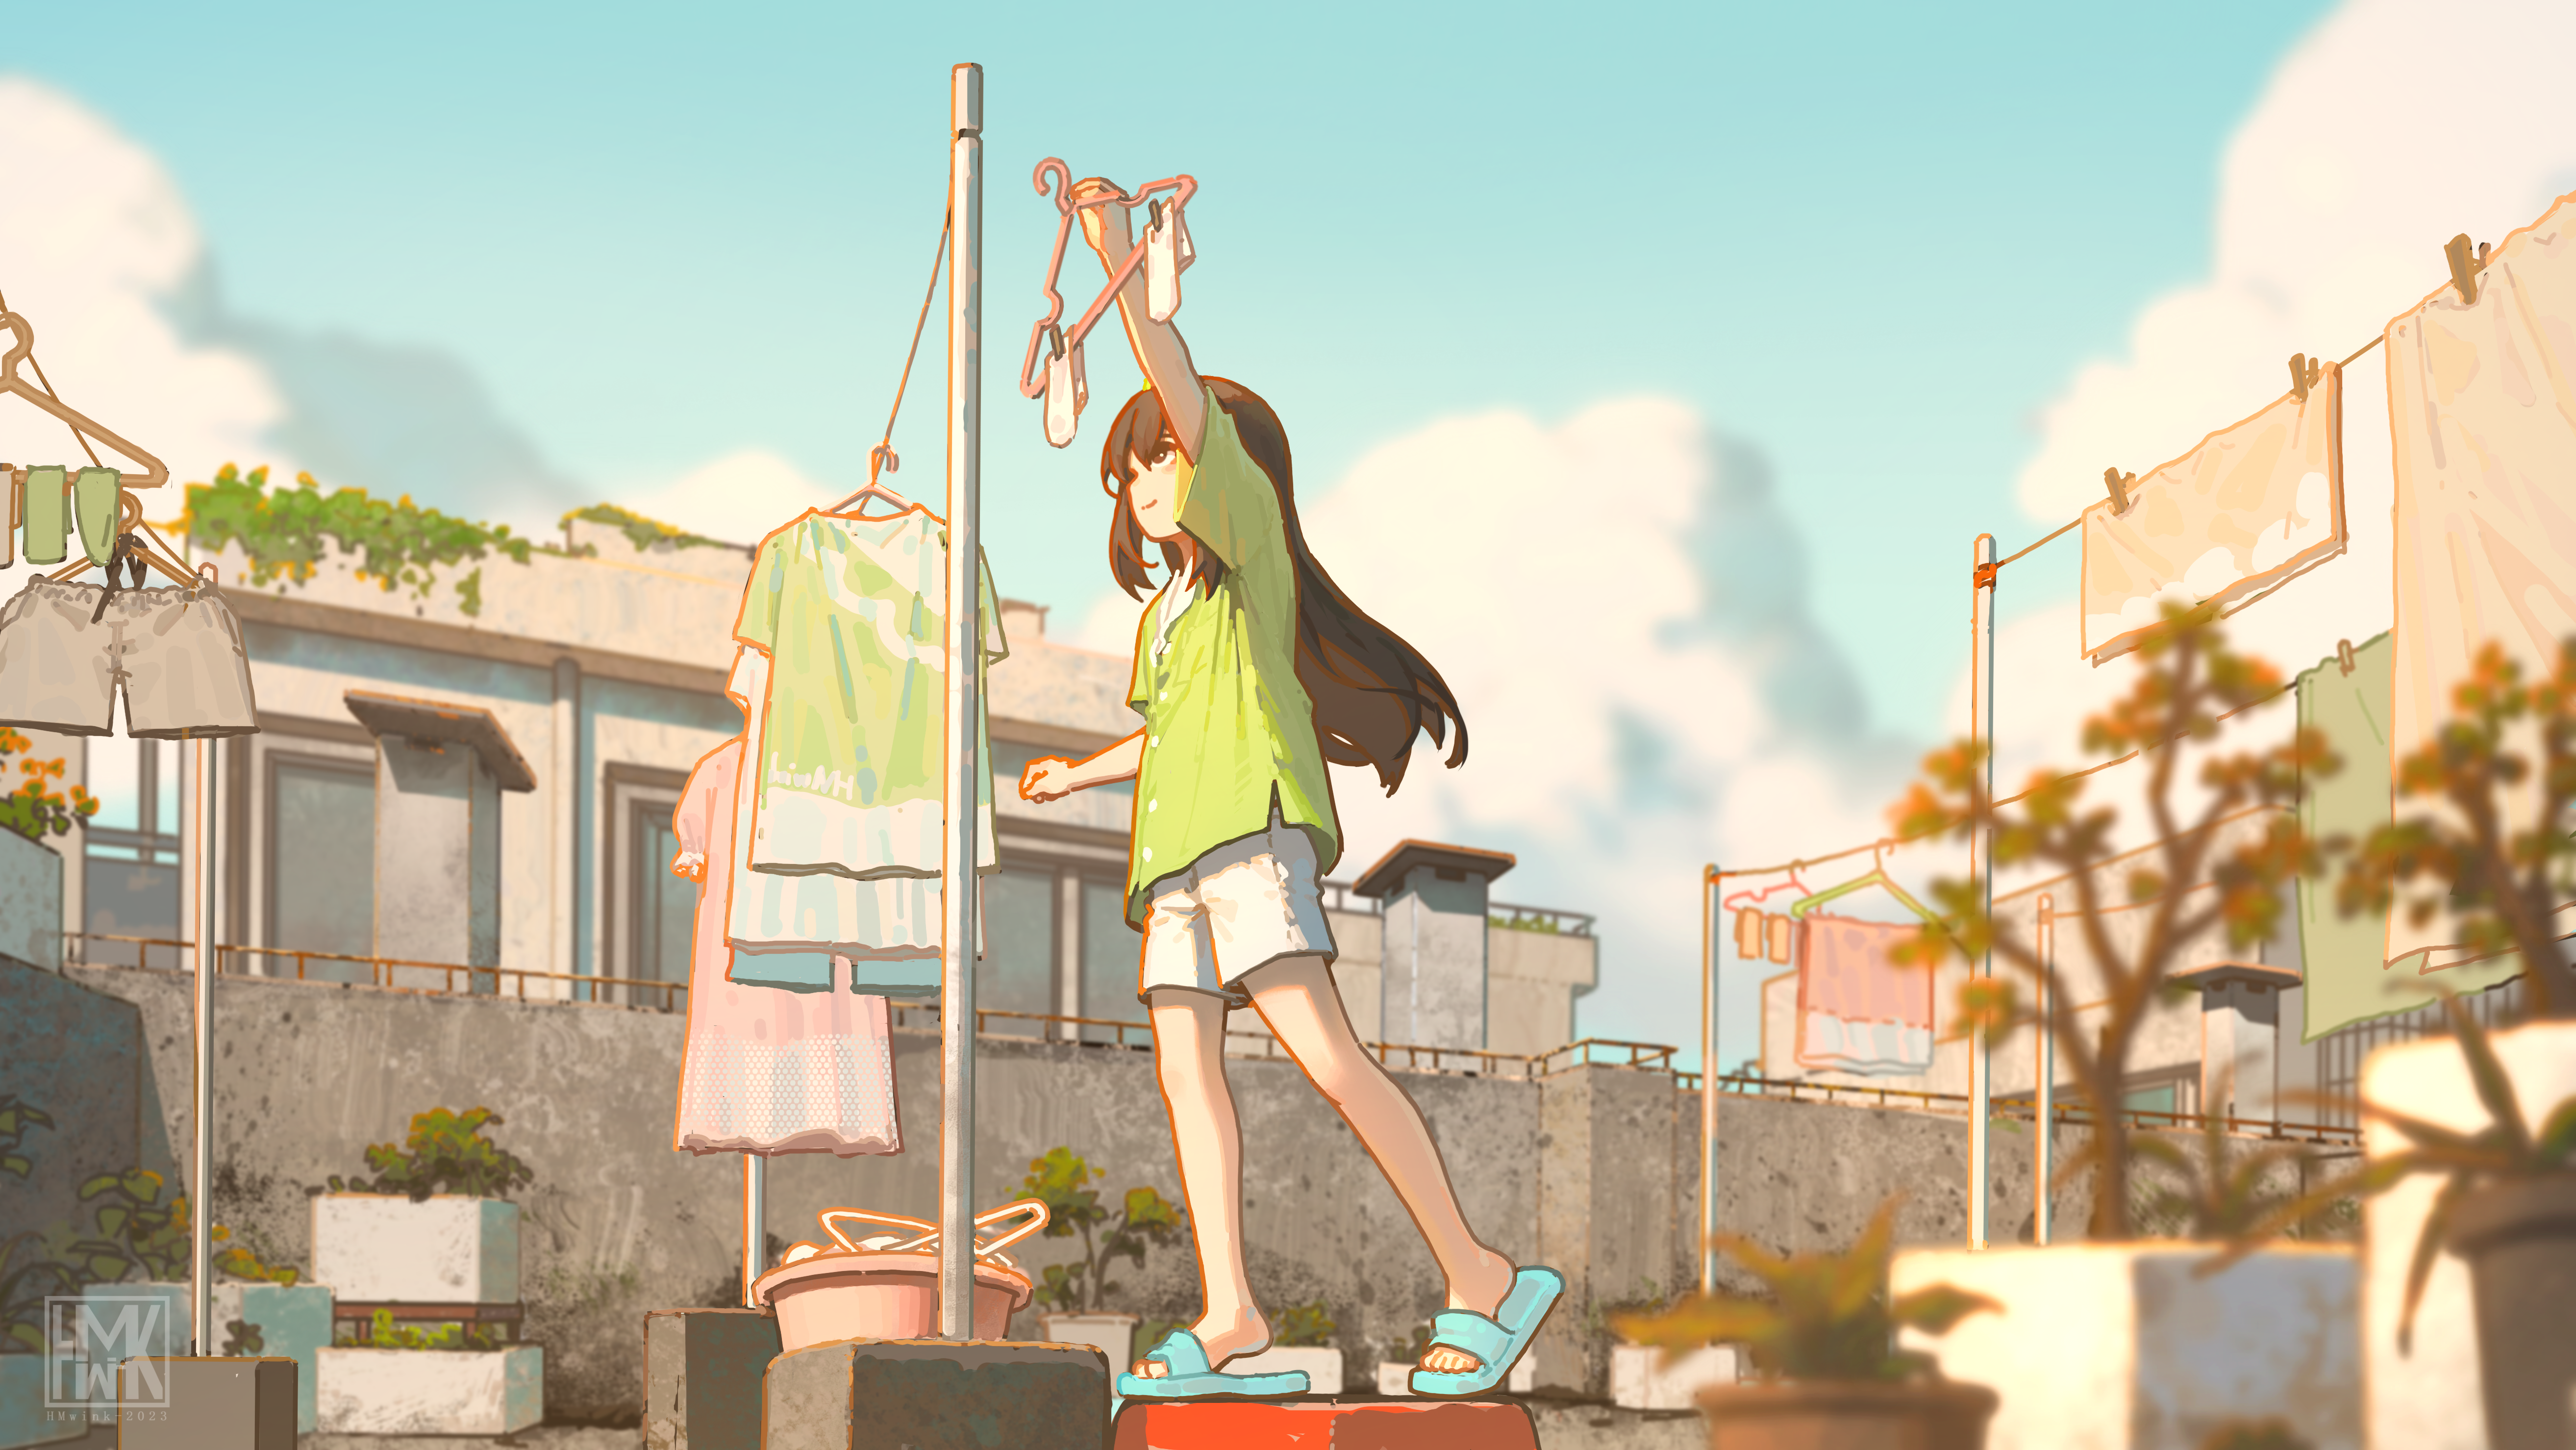 Yun Xi Original Characters One Arm Up Laundry Anime Girls Long Hair Sky Clouds Plants Standing Build 5255x2957